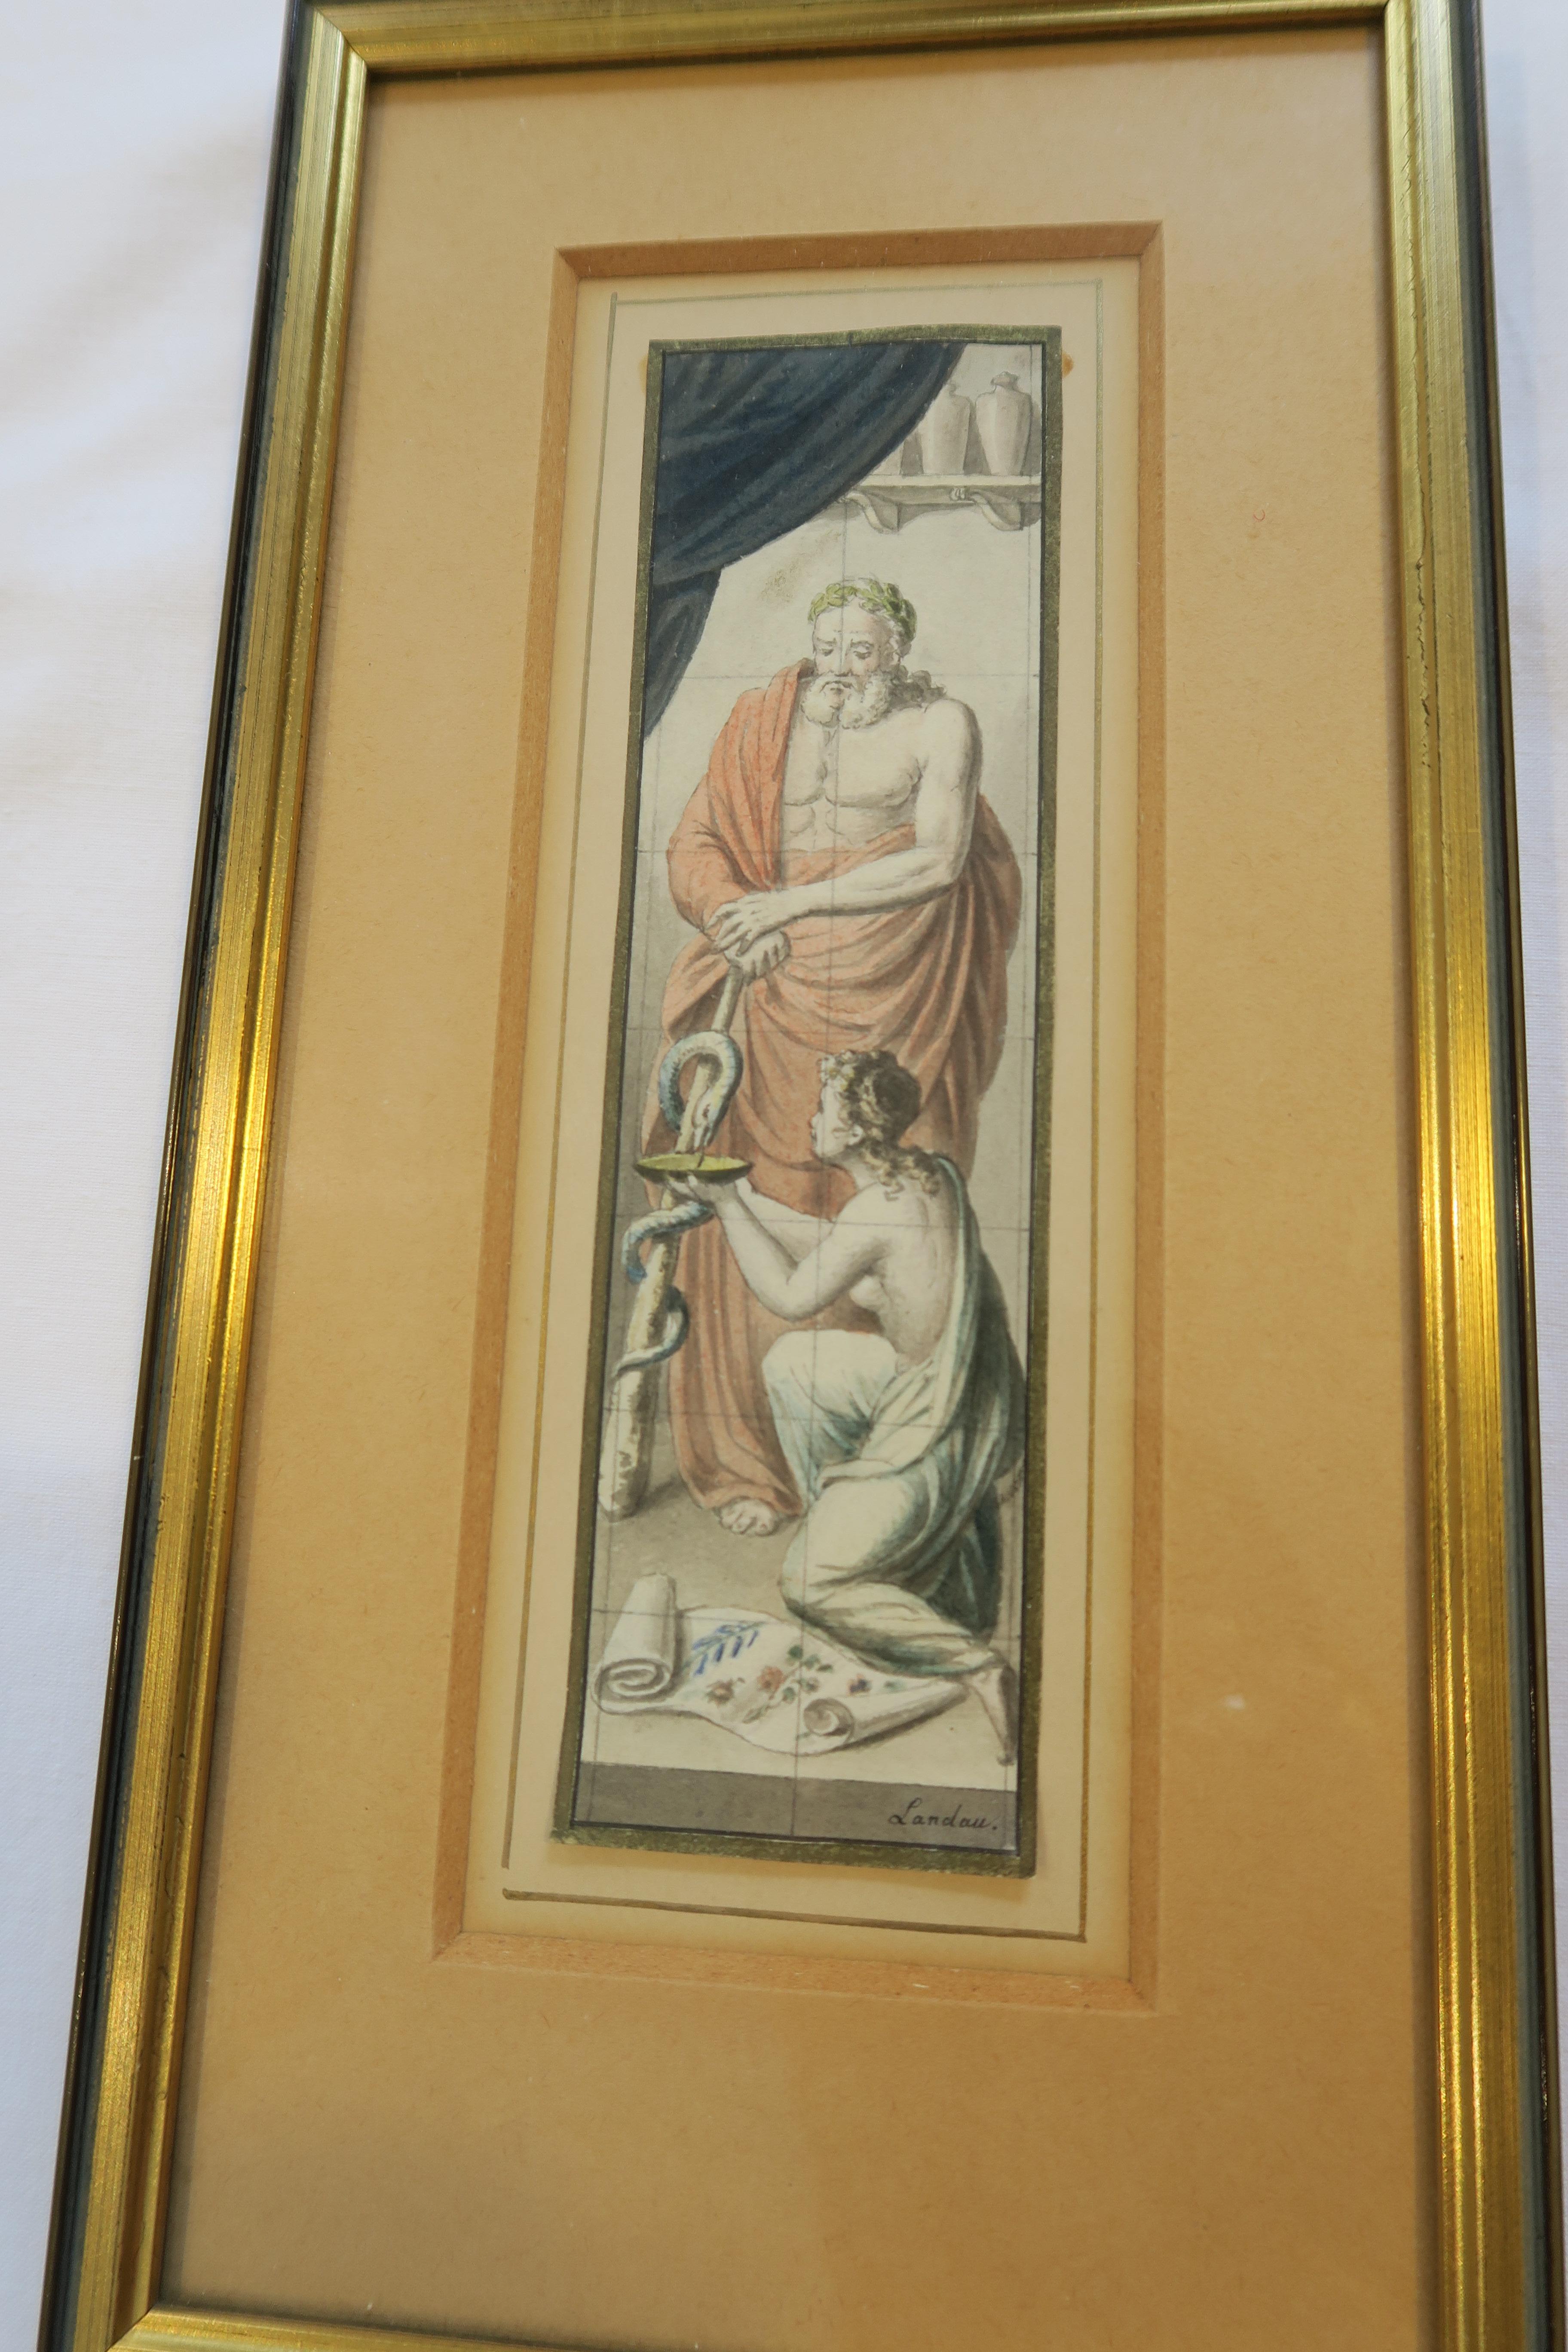 This is a pair of endearing water colour paintings signed Landau. They were framed in two matching golden frames and come with small sturdy loops at the back for hanging.
The paintings were made on behalf of a pharmacist in the mid 19th century as